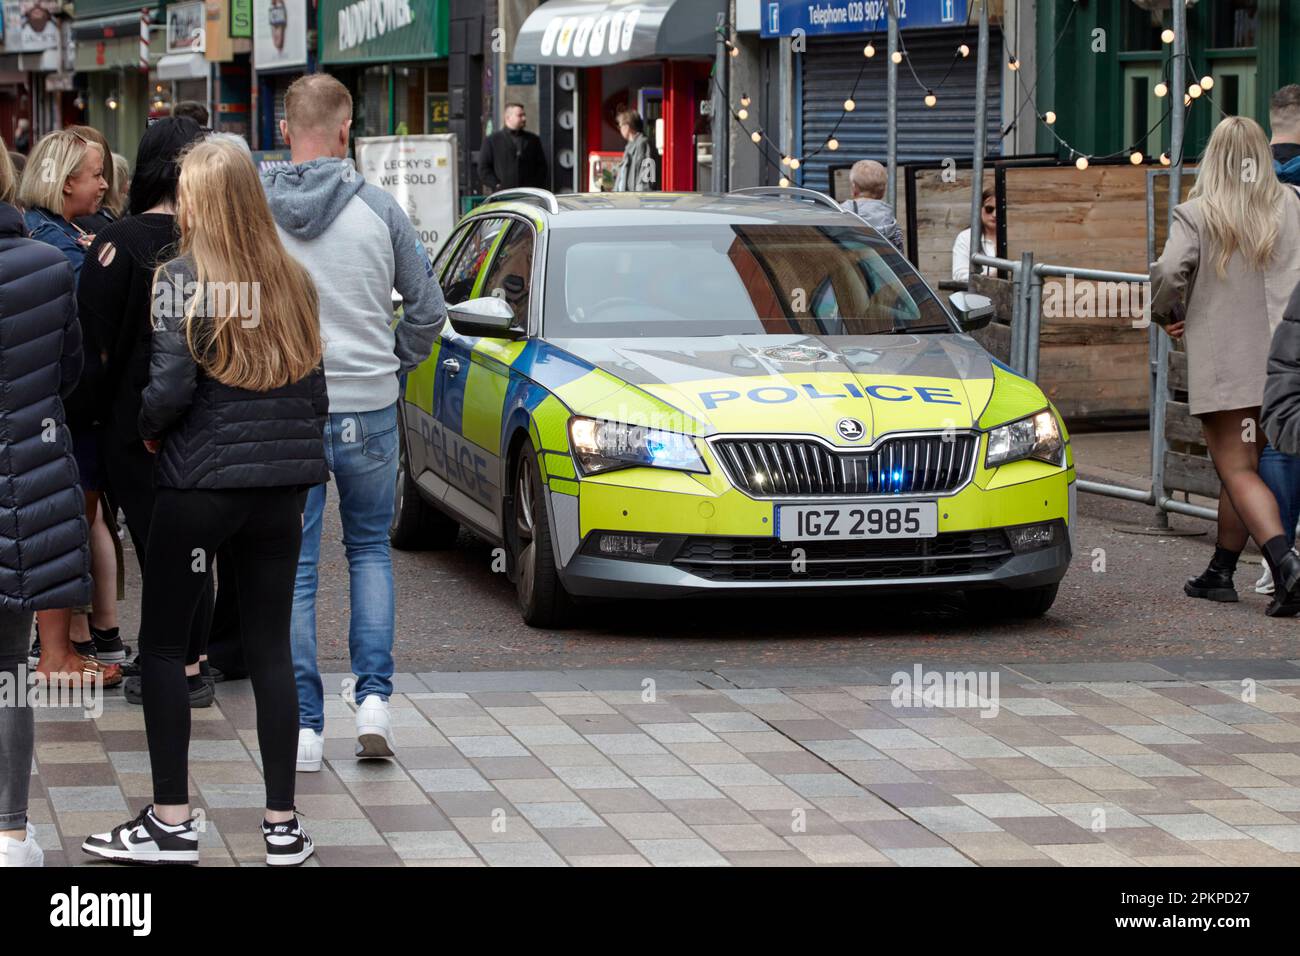 PSNI Police Service of Northern Ireland skoda patrol car with blue lights drives through busy pedestrian area on call out in Belfast City Centre, Nort Stock Photo